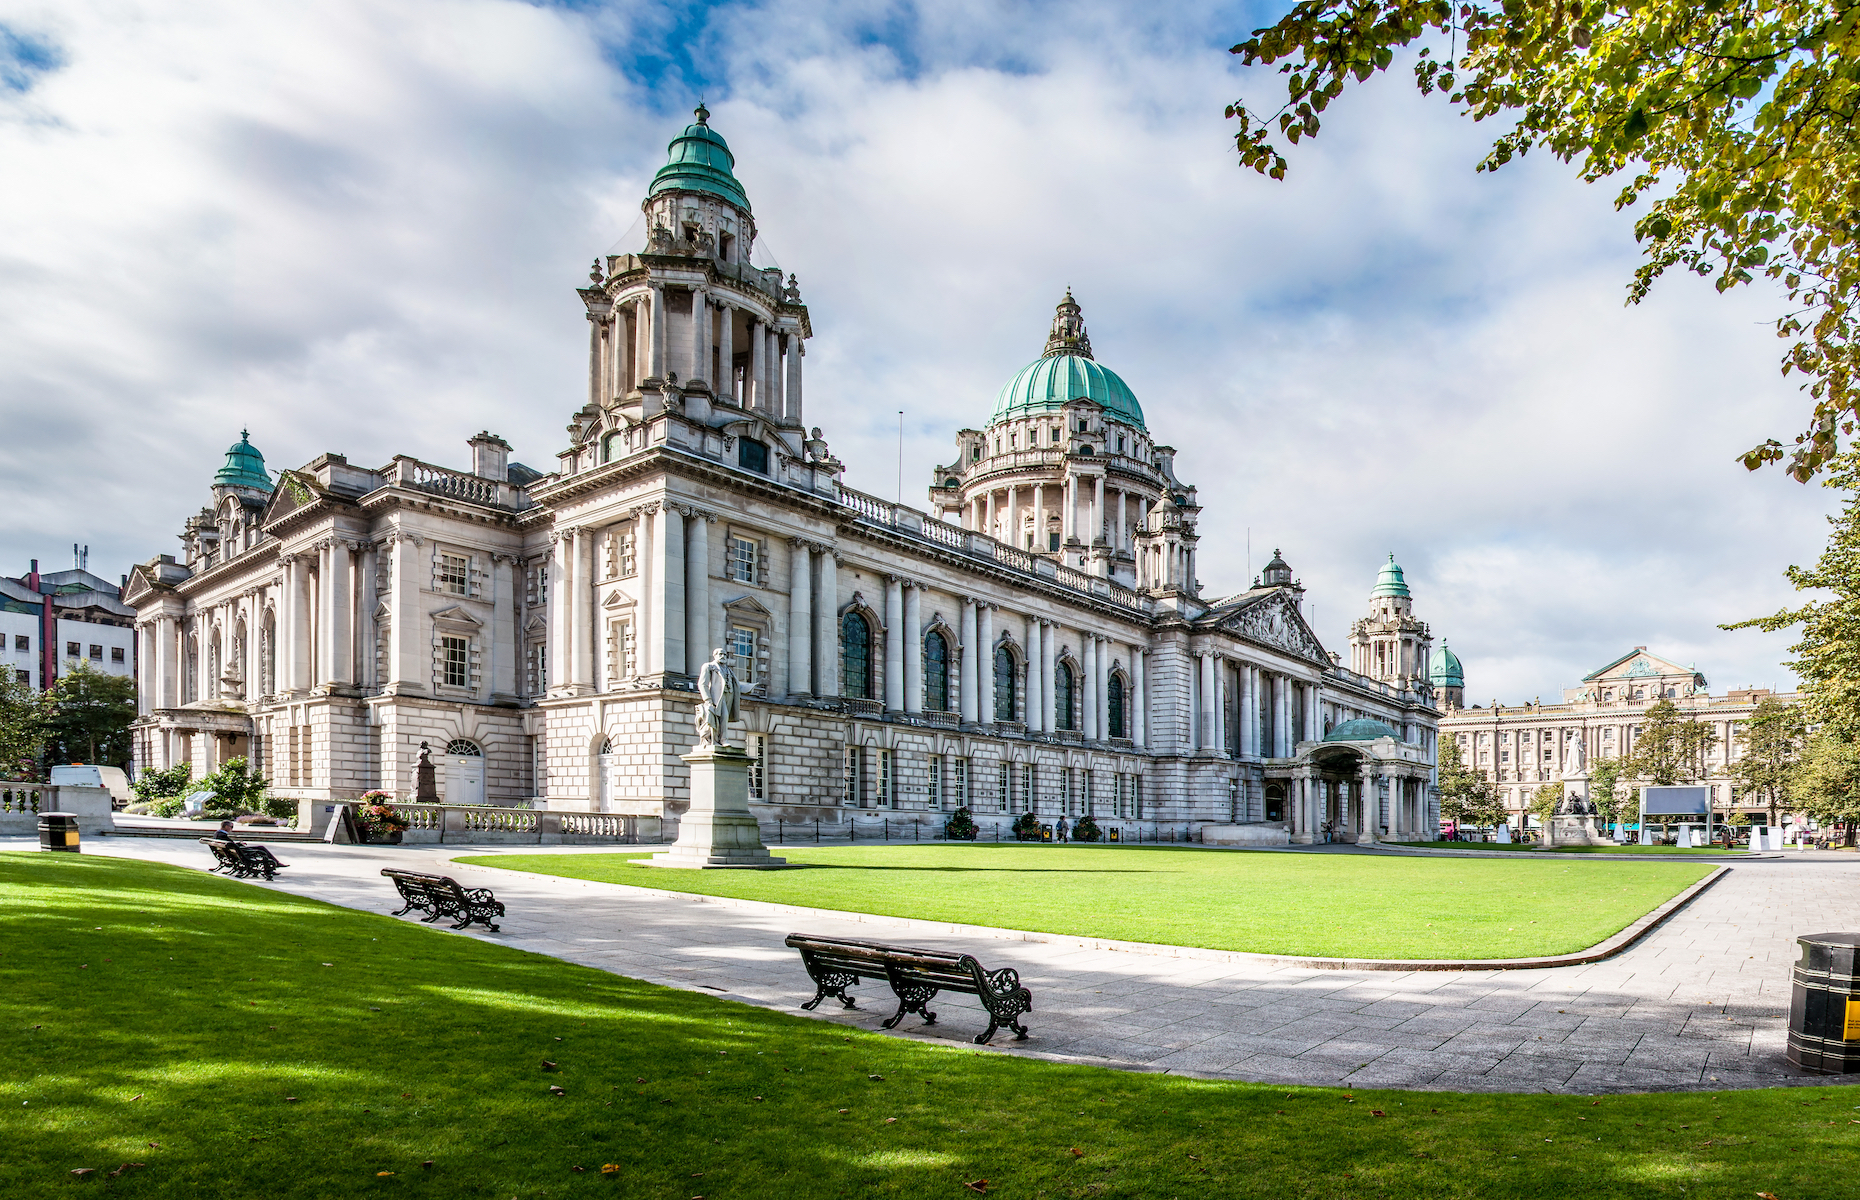 <p>Don’t leave Northern Ireland without visiting the city of <a href="https://www.ireland.com/en-us/destinations/experiences/belfast/" rel="noreferrer noopener">Belfast</a><a href="https://www.ireland.com/en-us/destinations/experiences/belfast/" rel="noreferrer noopener">,</a> birthplace of the <em>Titanic</em>. In addition to a museum dedicated to the famous ship, you can also visit the sumptuous Belfast Castle, grab a bite to eat at St George’s Market, and stroll along the Peace Wall.</p>